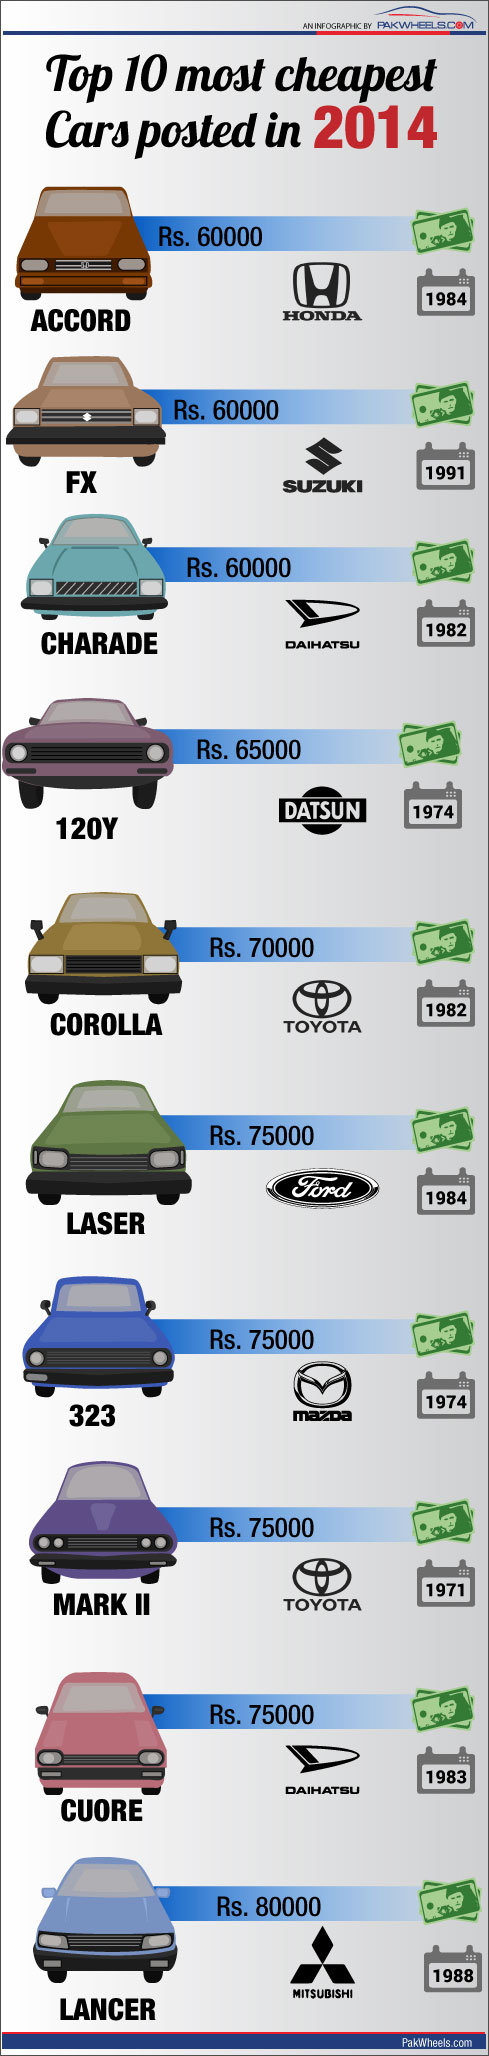 Top 10 Cheapest Cars in Pakistan